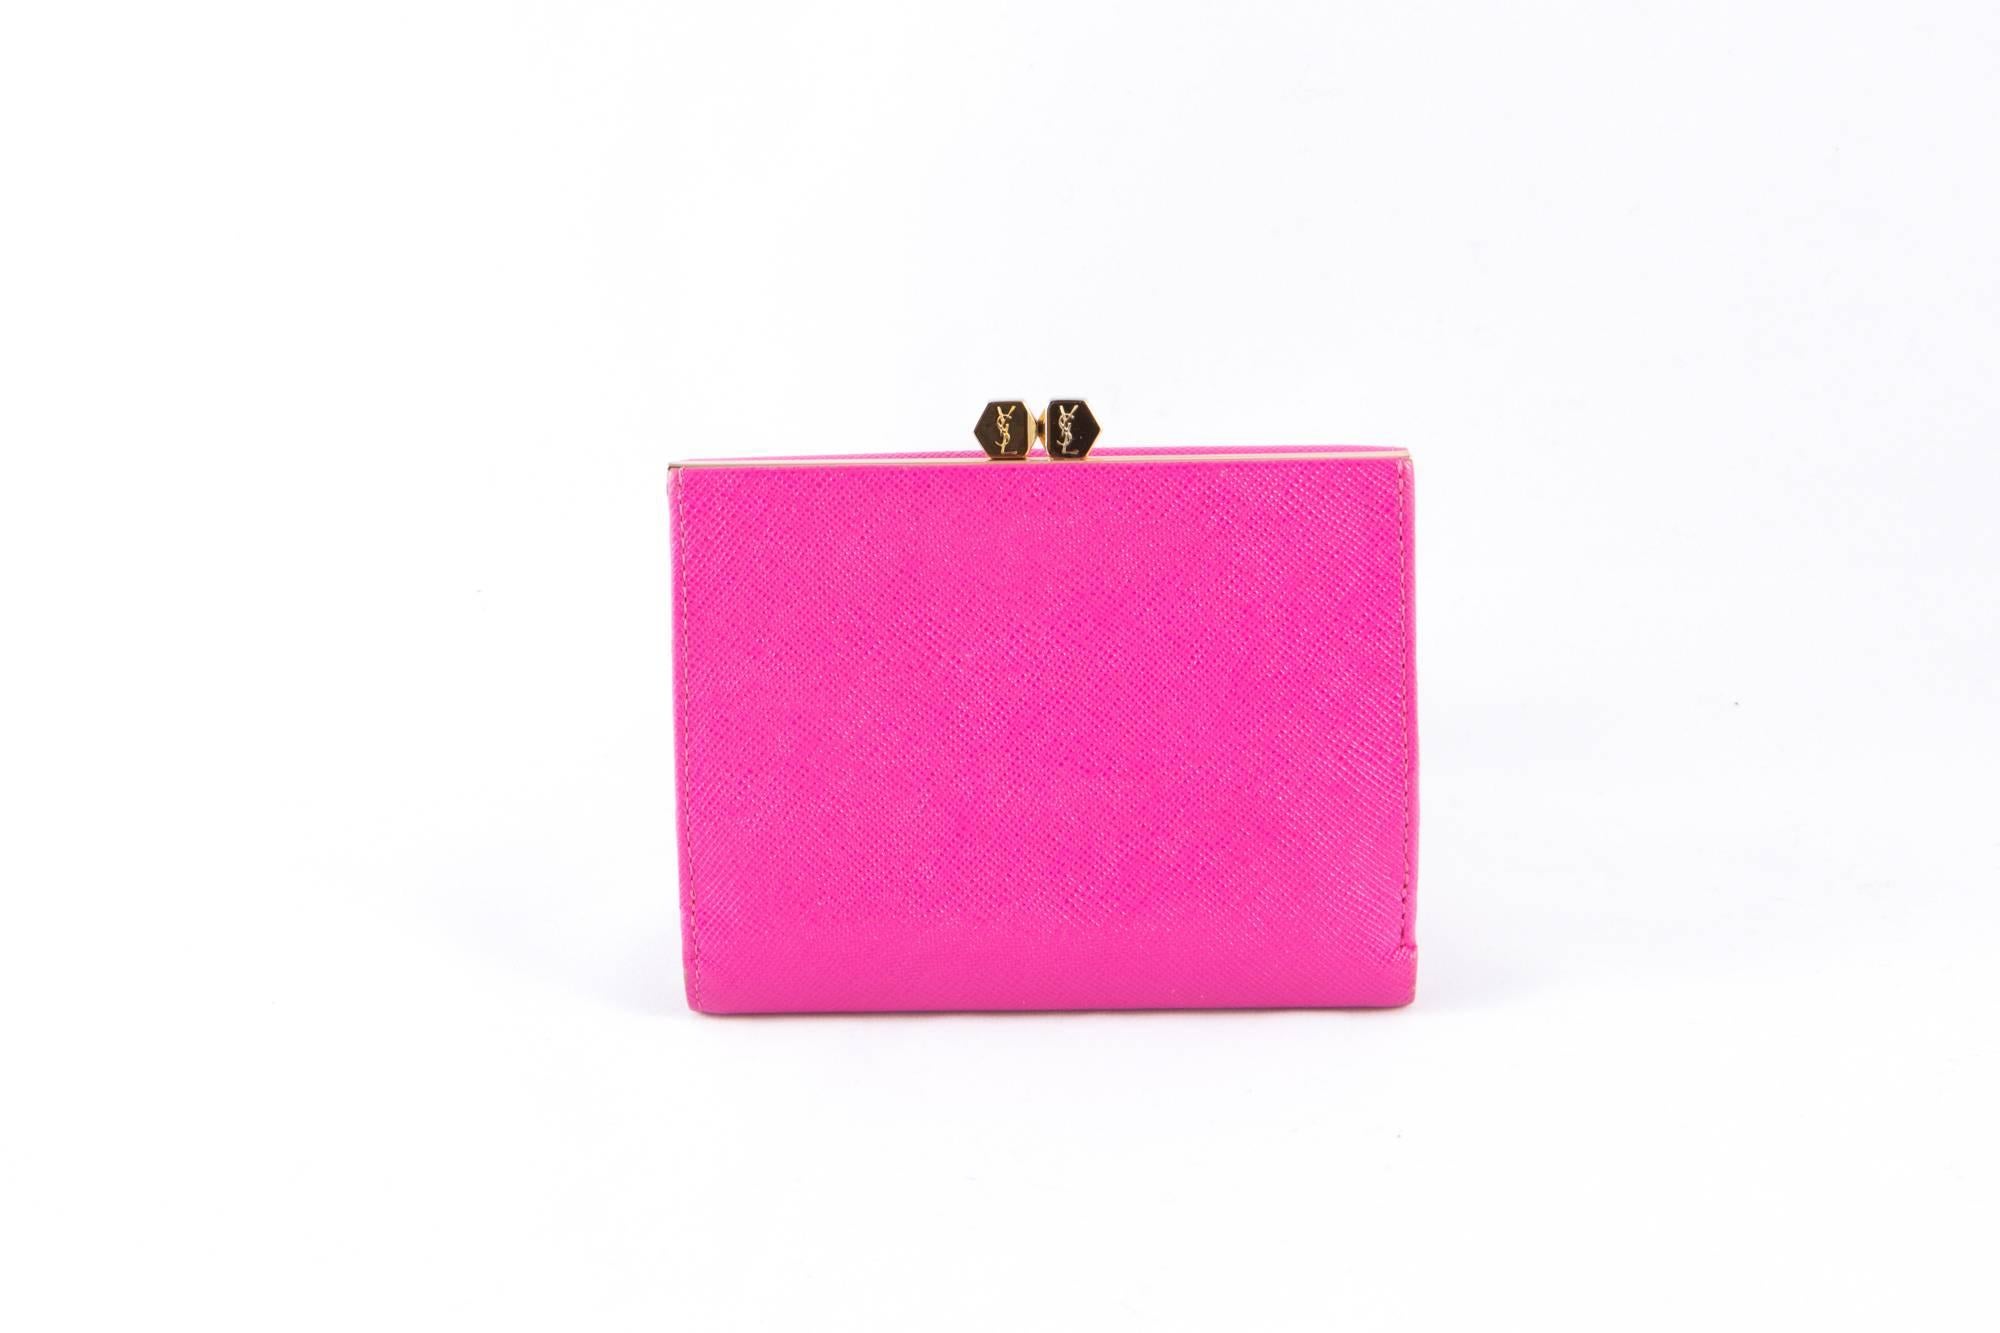 Gorgeous pink textured leather wallet Saint laurent featuring a gold tone leather heart on front, multi compartments, for coins and cards.
Delivered in original vintage black Yves Saint Laurent box.
In excellent vintage condition. Made in